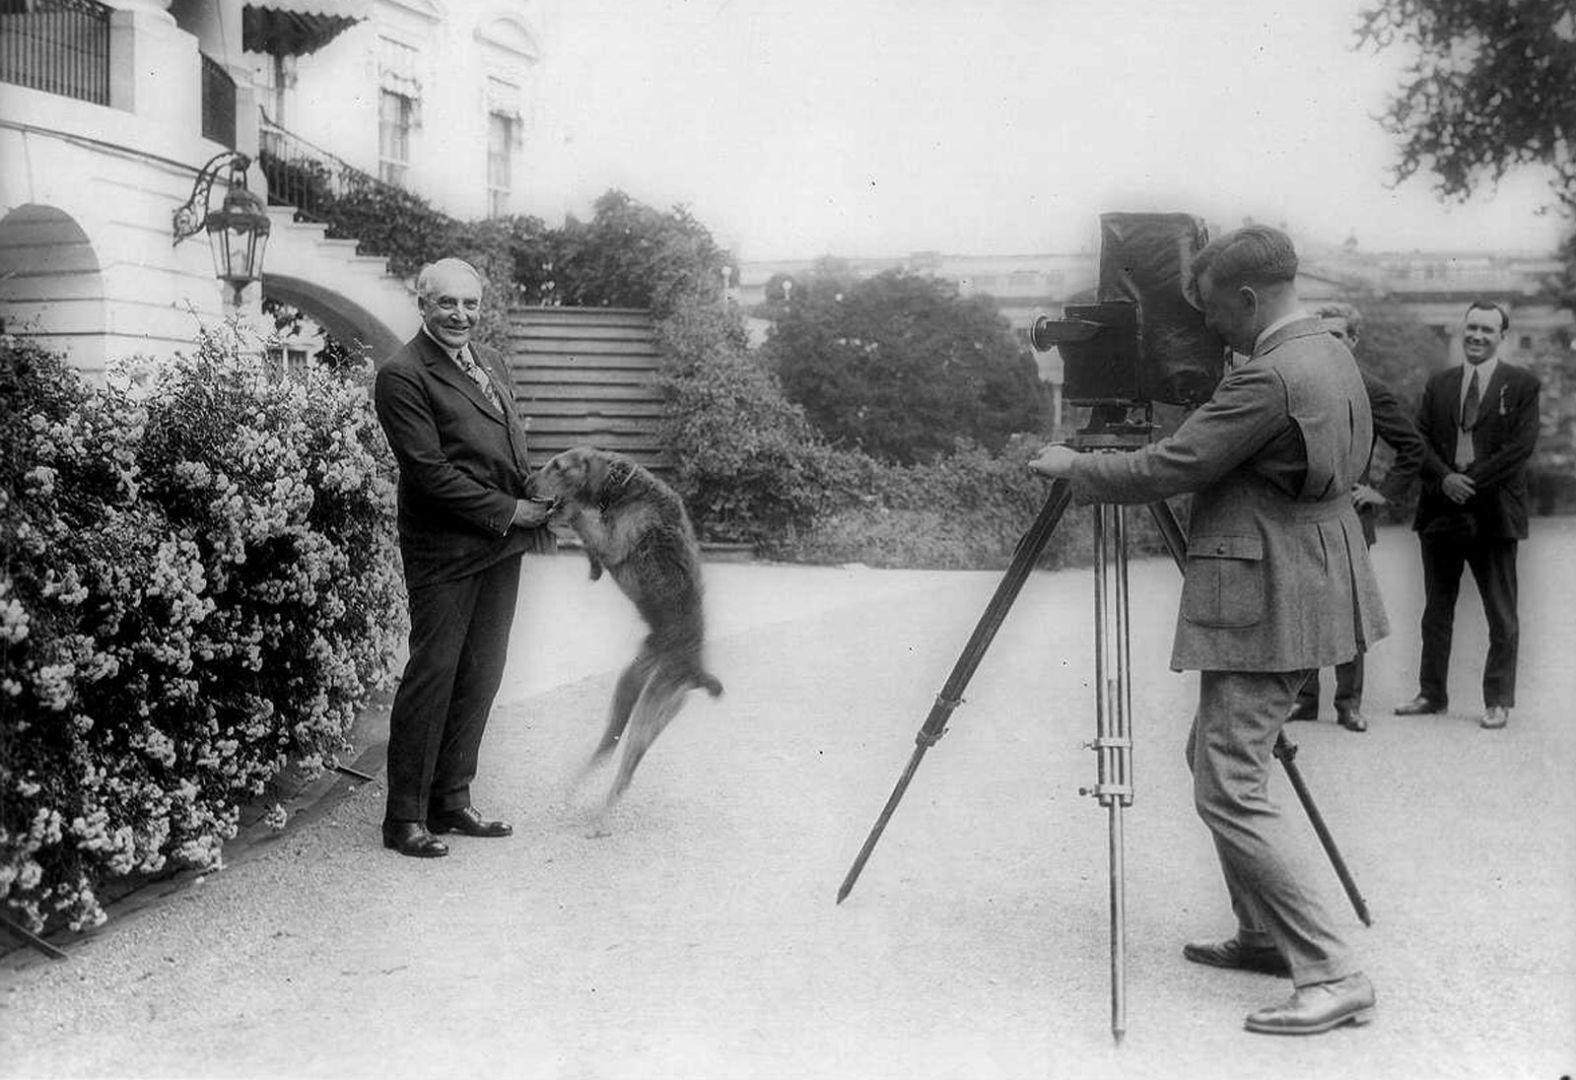 Warren G. Harding and his dog Laddie Boy are photographed in front of the White House in 1922. Laddie Boy was an Airedale terrier.